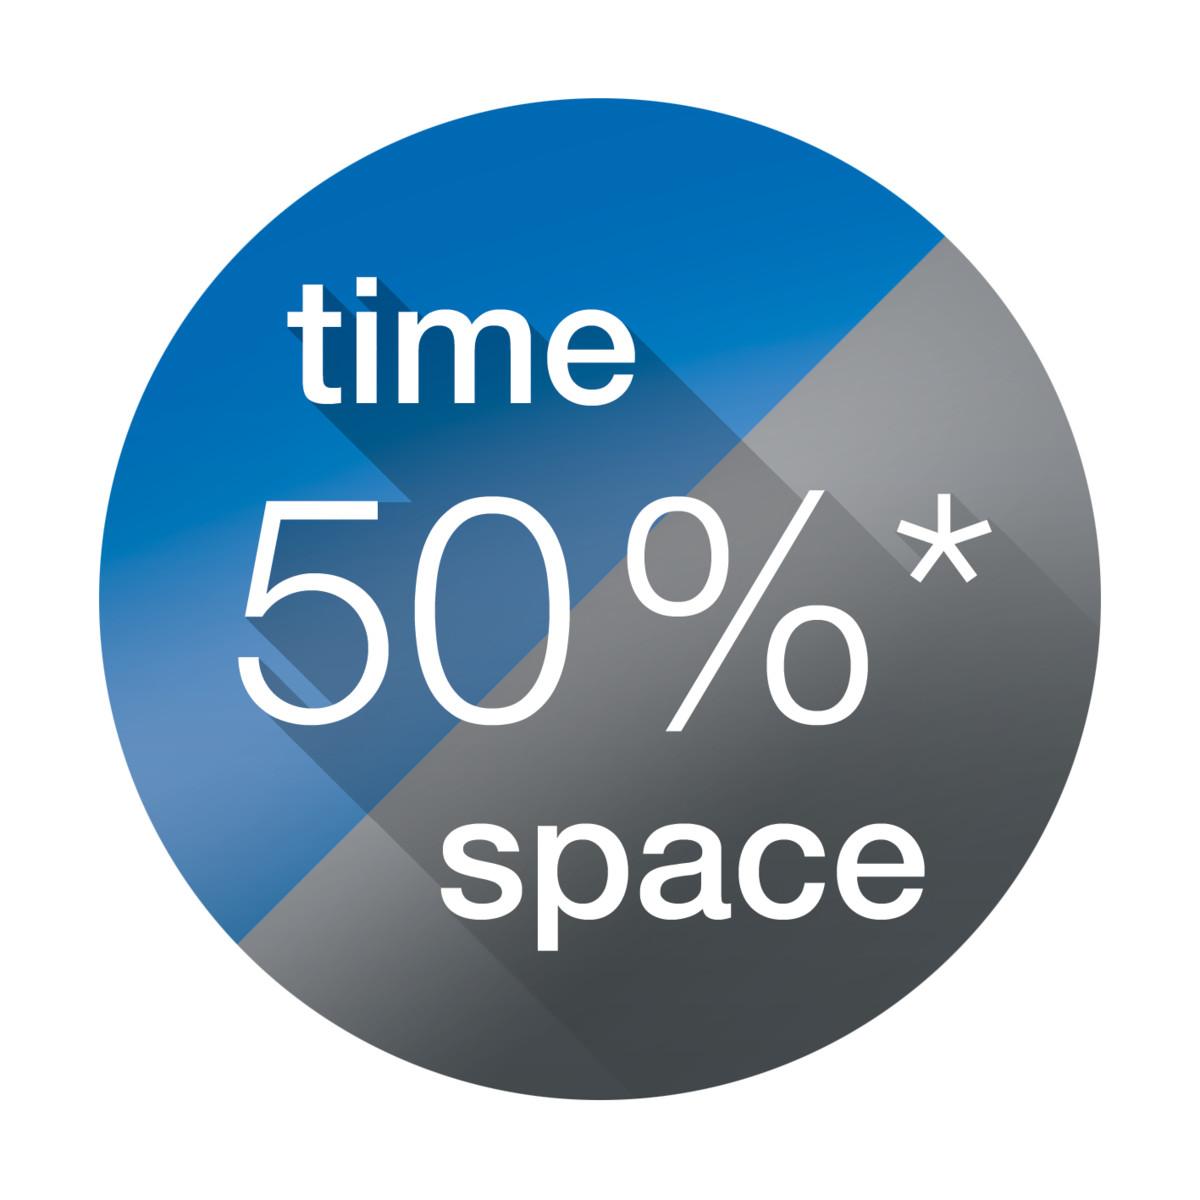 ../../../../../Downloads/ICON_time_50p_space_blue_grey.jpg